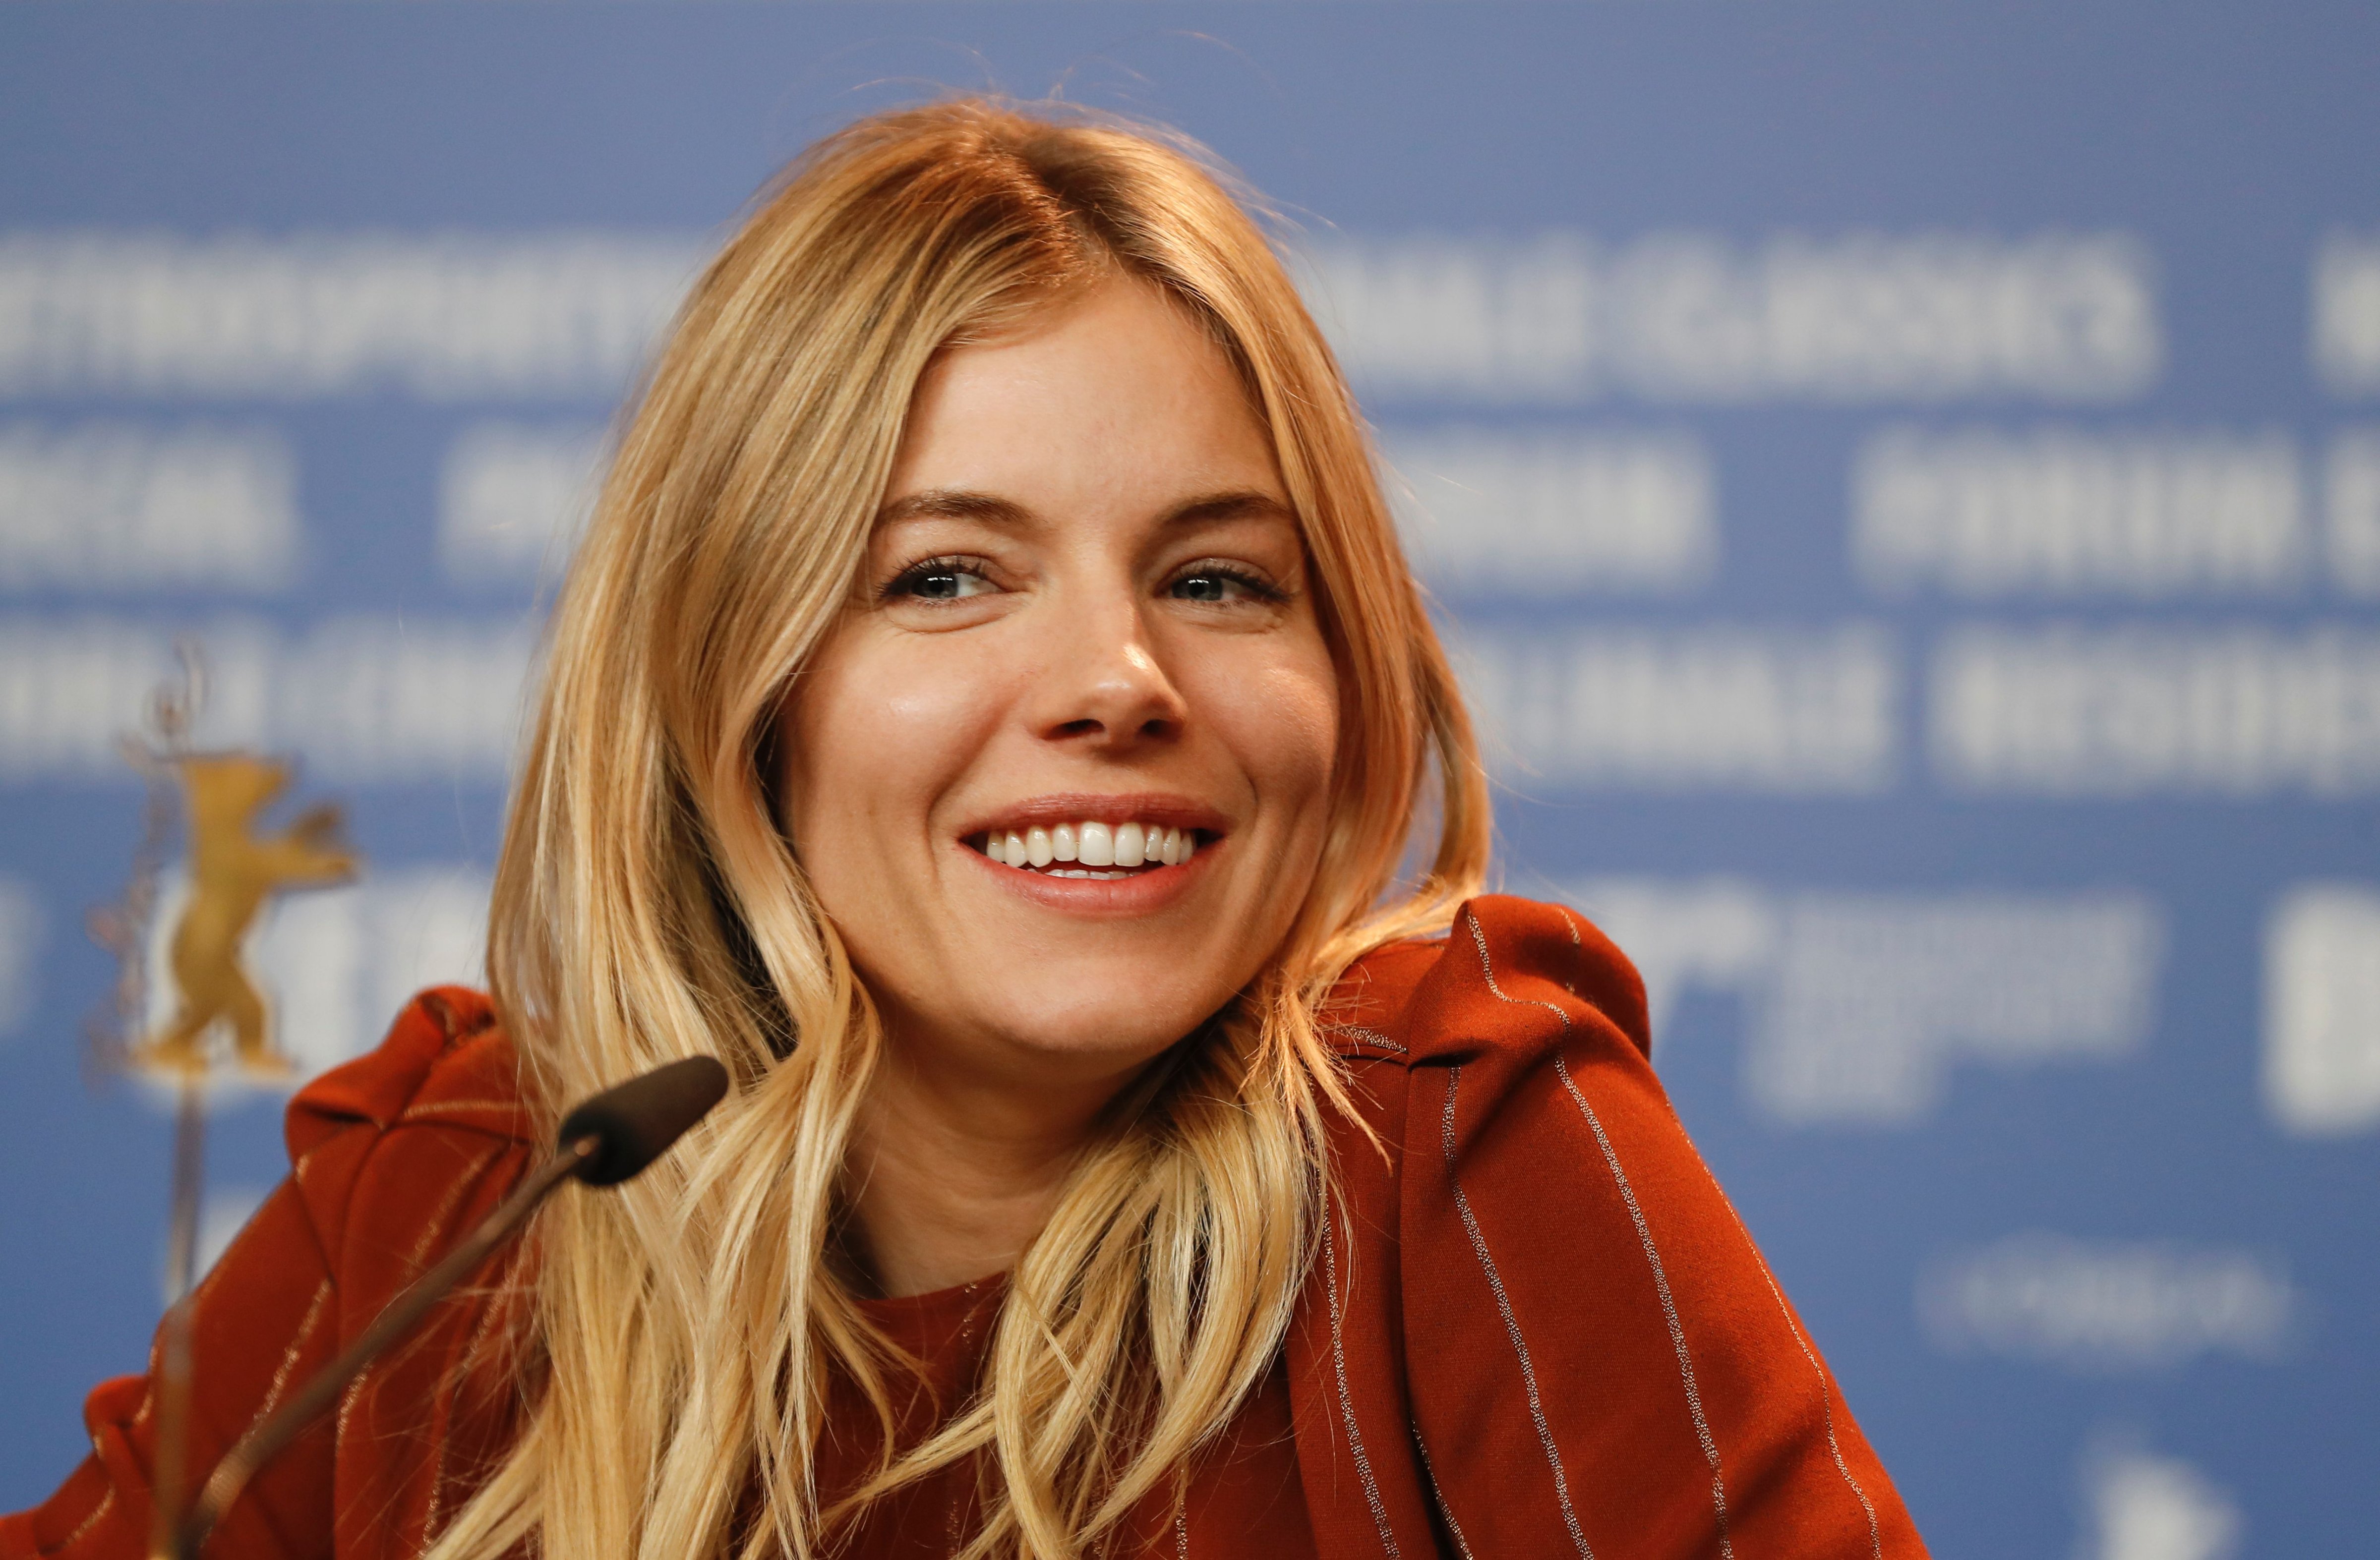 US-British actress Sienna Miller attends a press conference for the film "The Lost City of Z" presented at the Berlinale Special section of the 67th Berlinale film festival in Berlin on February 14, 2017. (Odd Anderse—AFP—Getty Images)